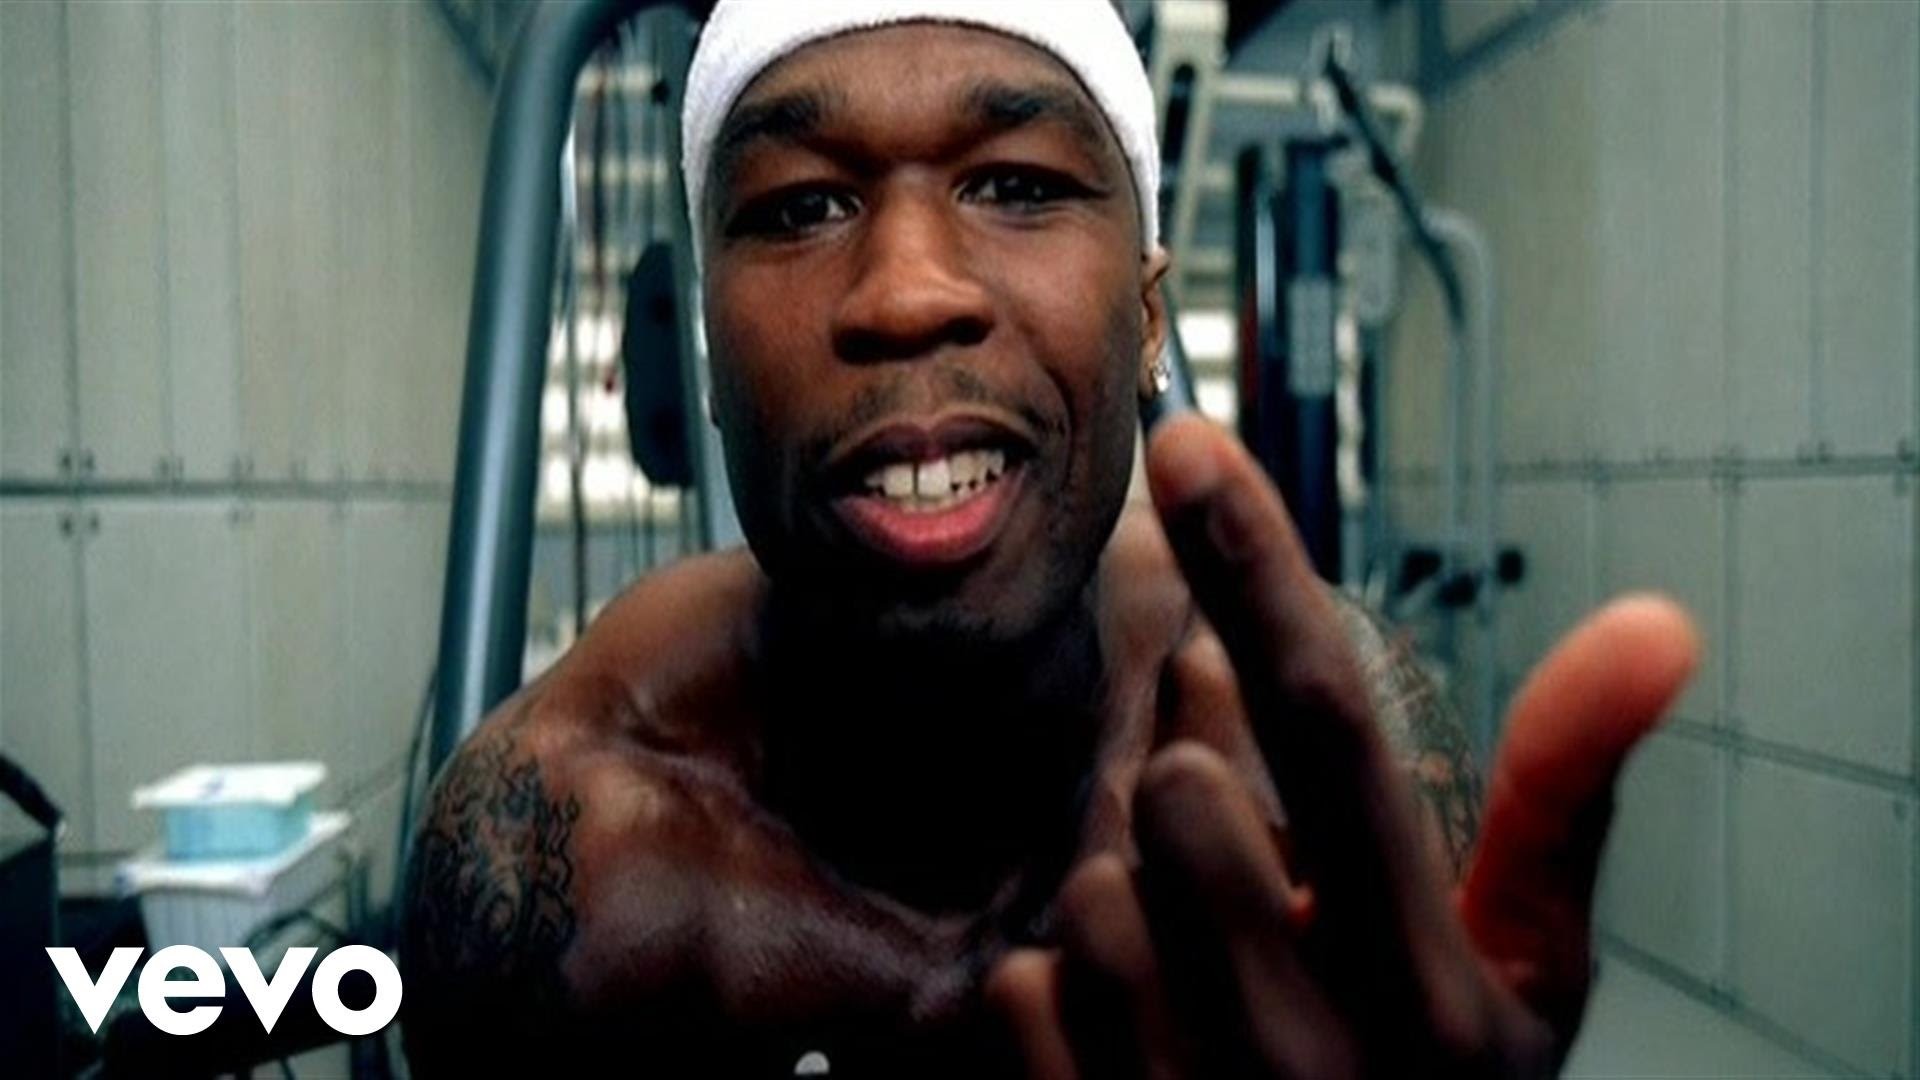 1920x1080 50 Cent Returning To Dublin On 15th Anniversary Of Get Rich or Die Tryin'